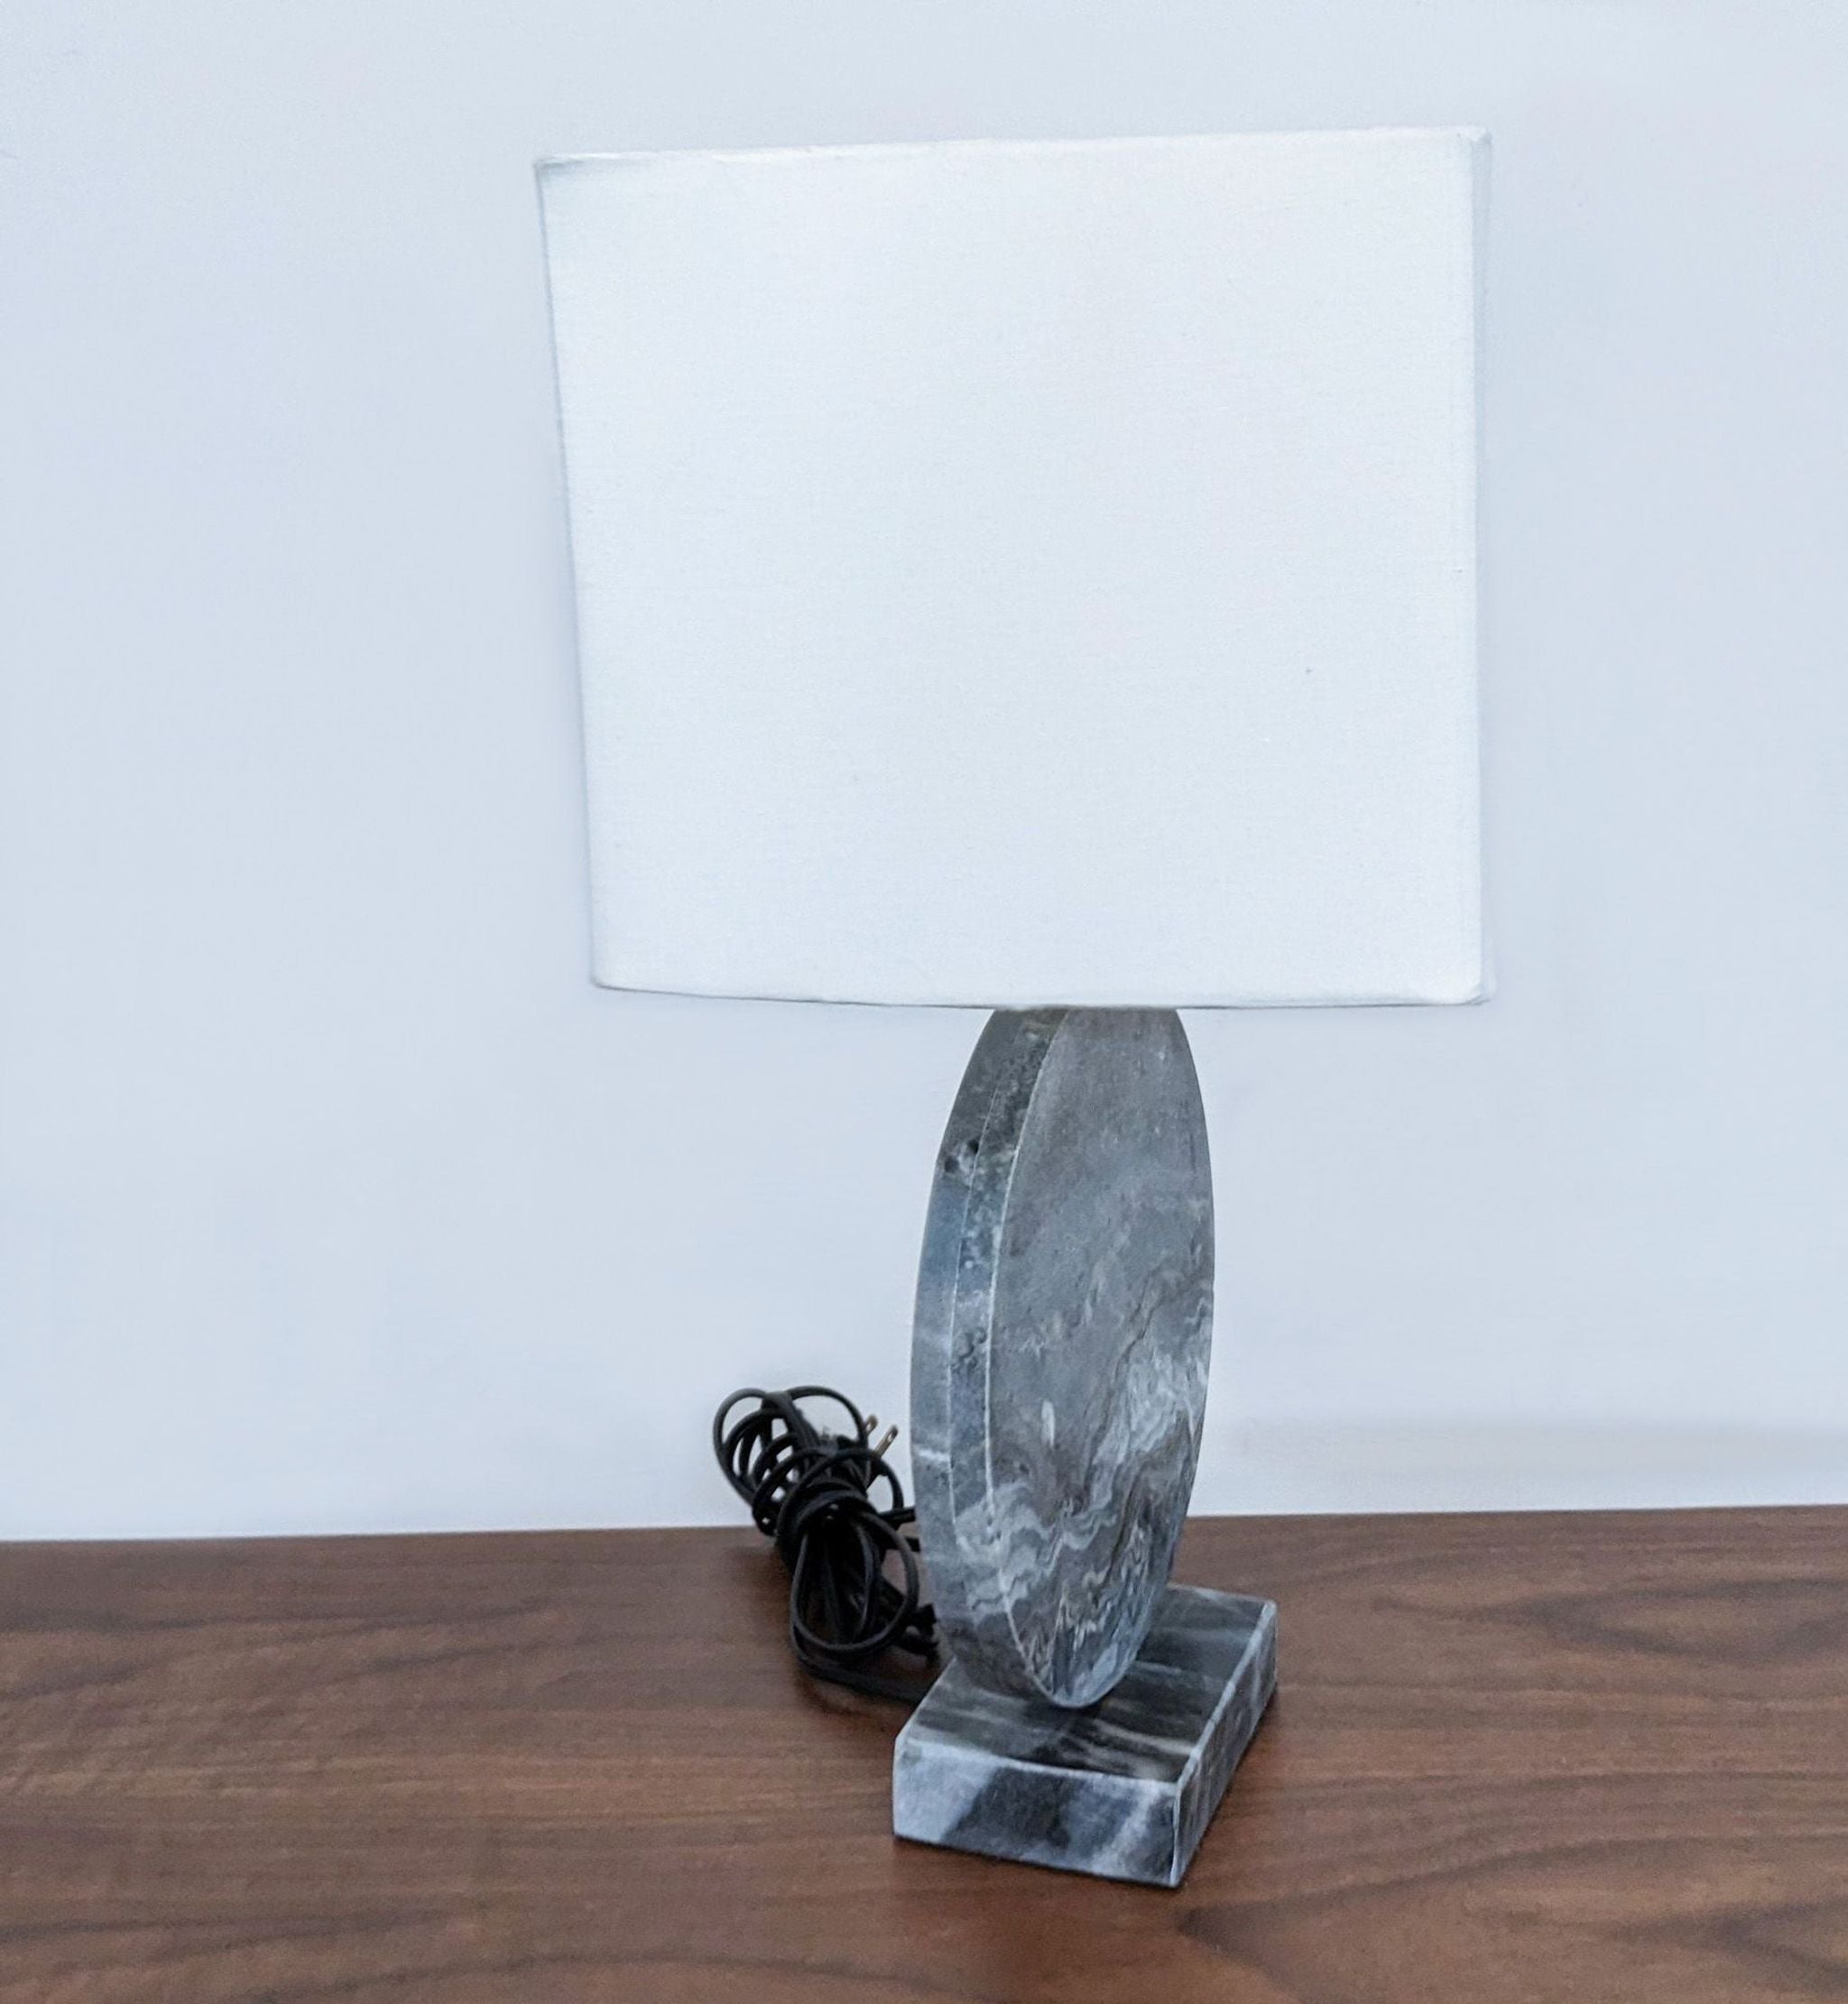 Marble-patterned Reperch table lamp with a white fabric shade, visible cord, displayed on a wood tabletop.